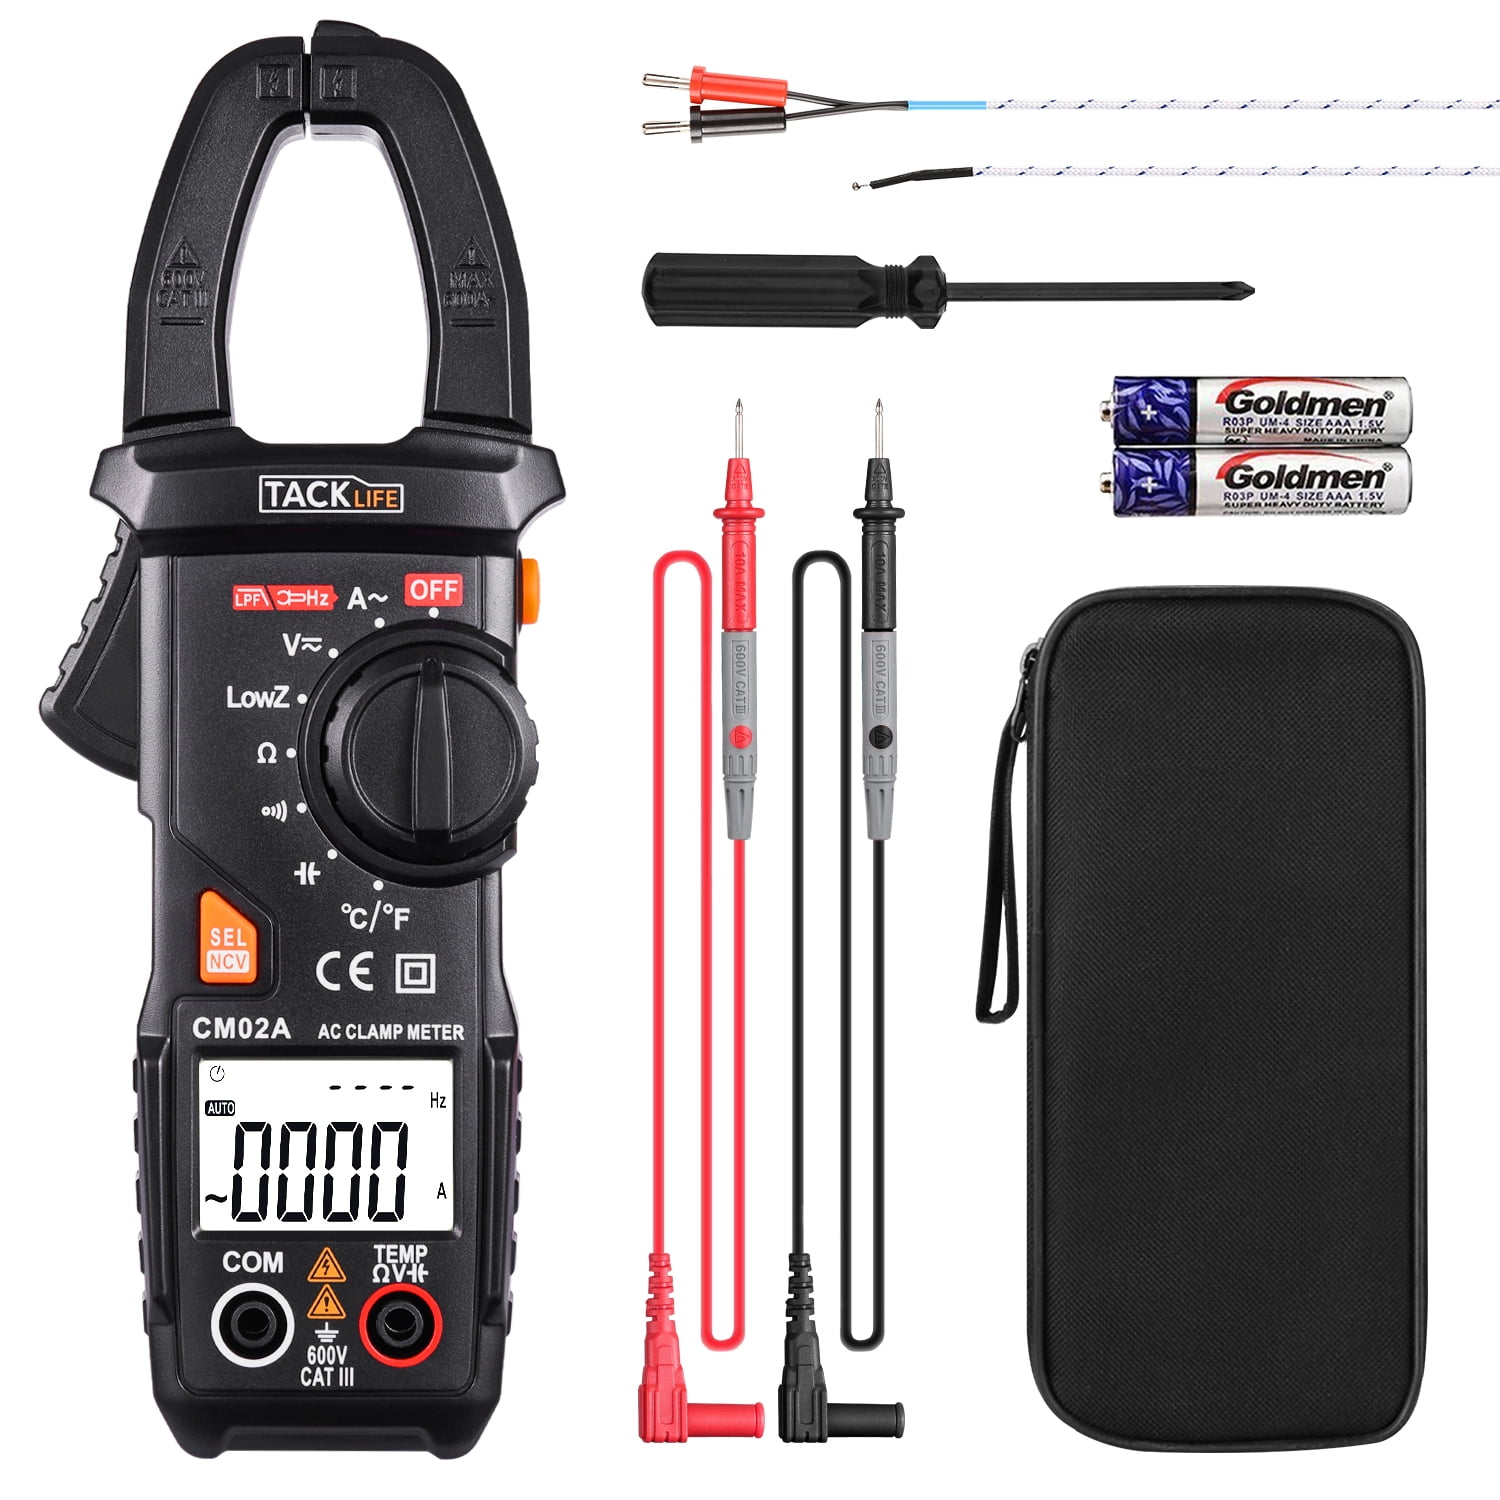 Auto Ranging Digital Multimeter TRMS 6000 With Battery Alligator Clips Test … for sale online 